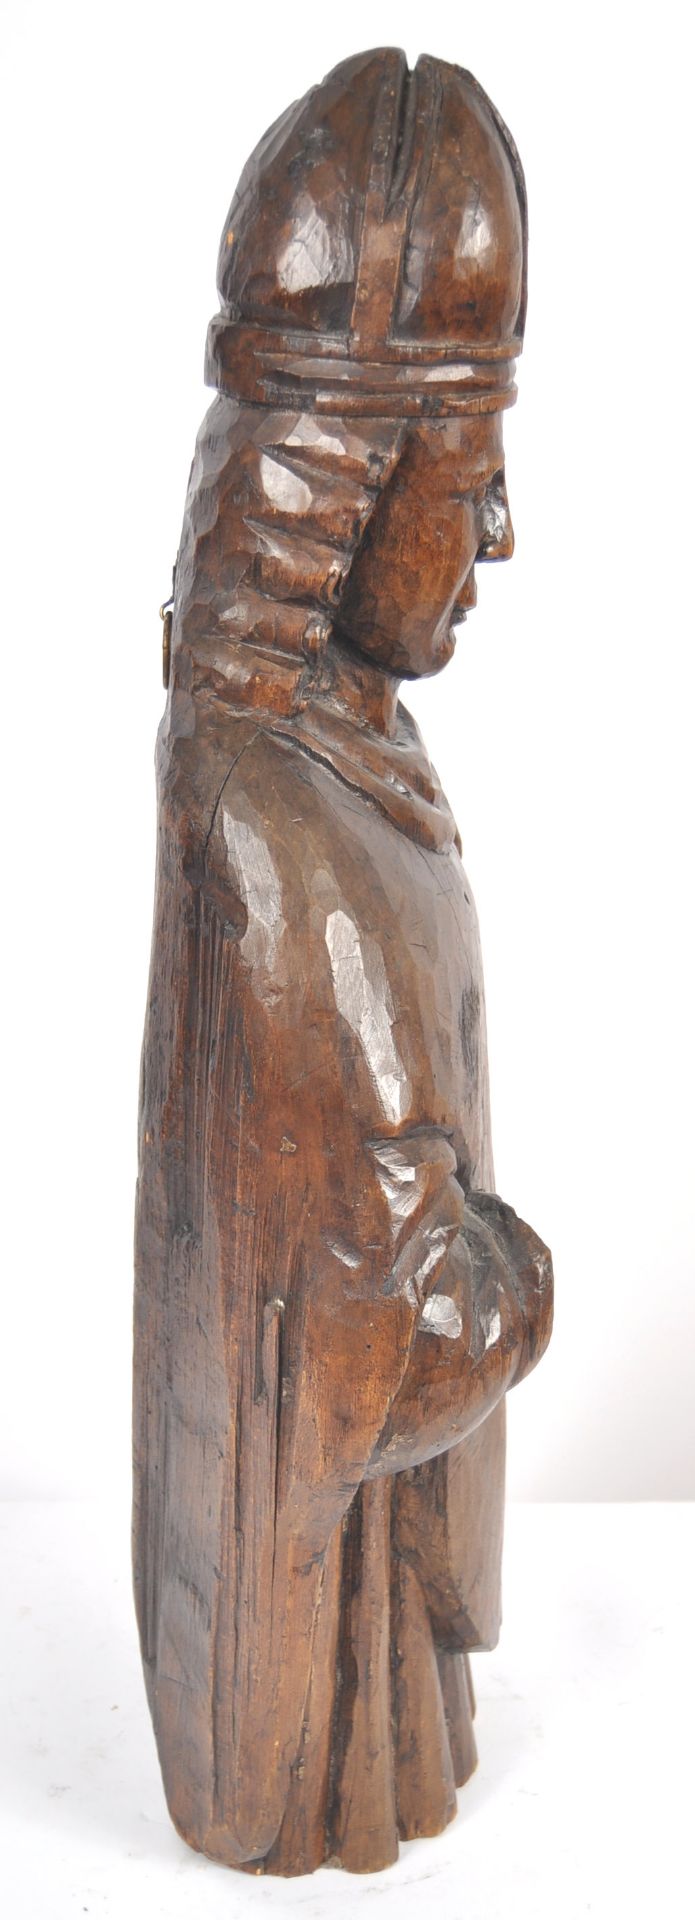 19TH CENTURY OAK CARVED RELGIOUS FIGURE - Image 3 of 5